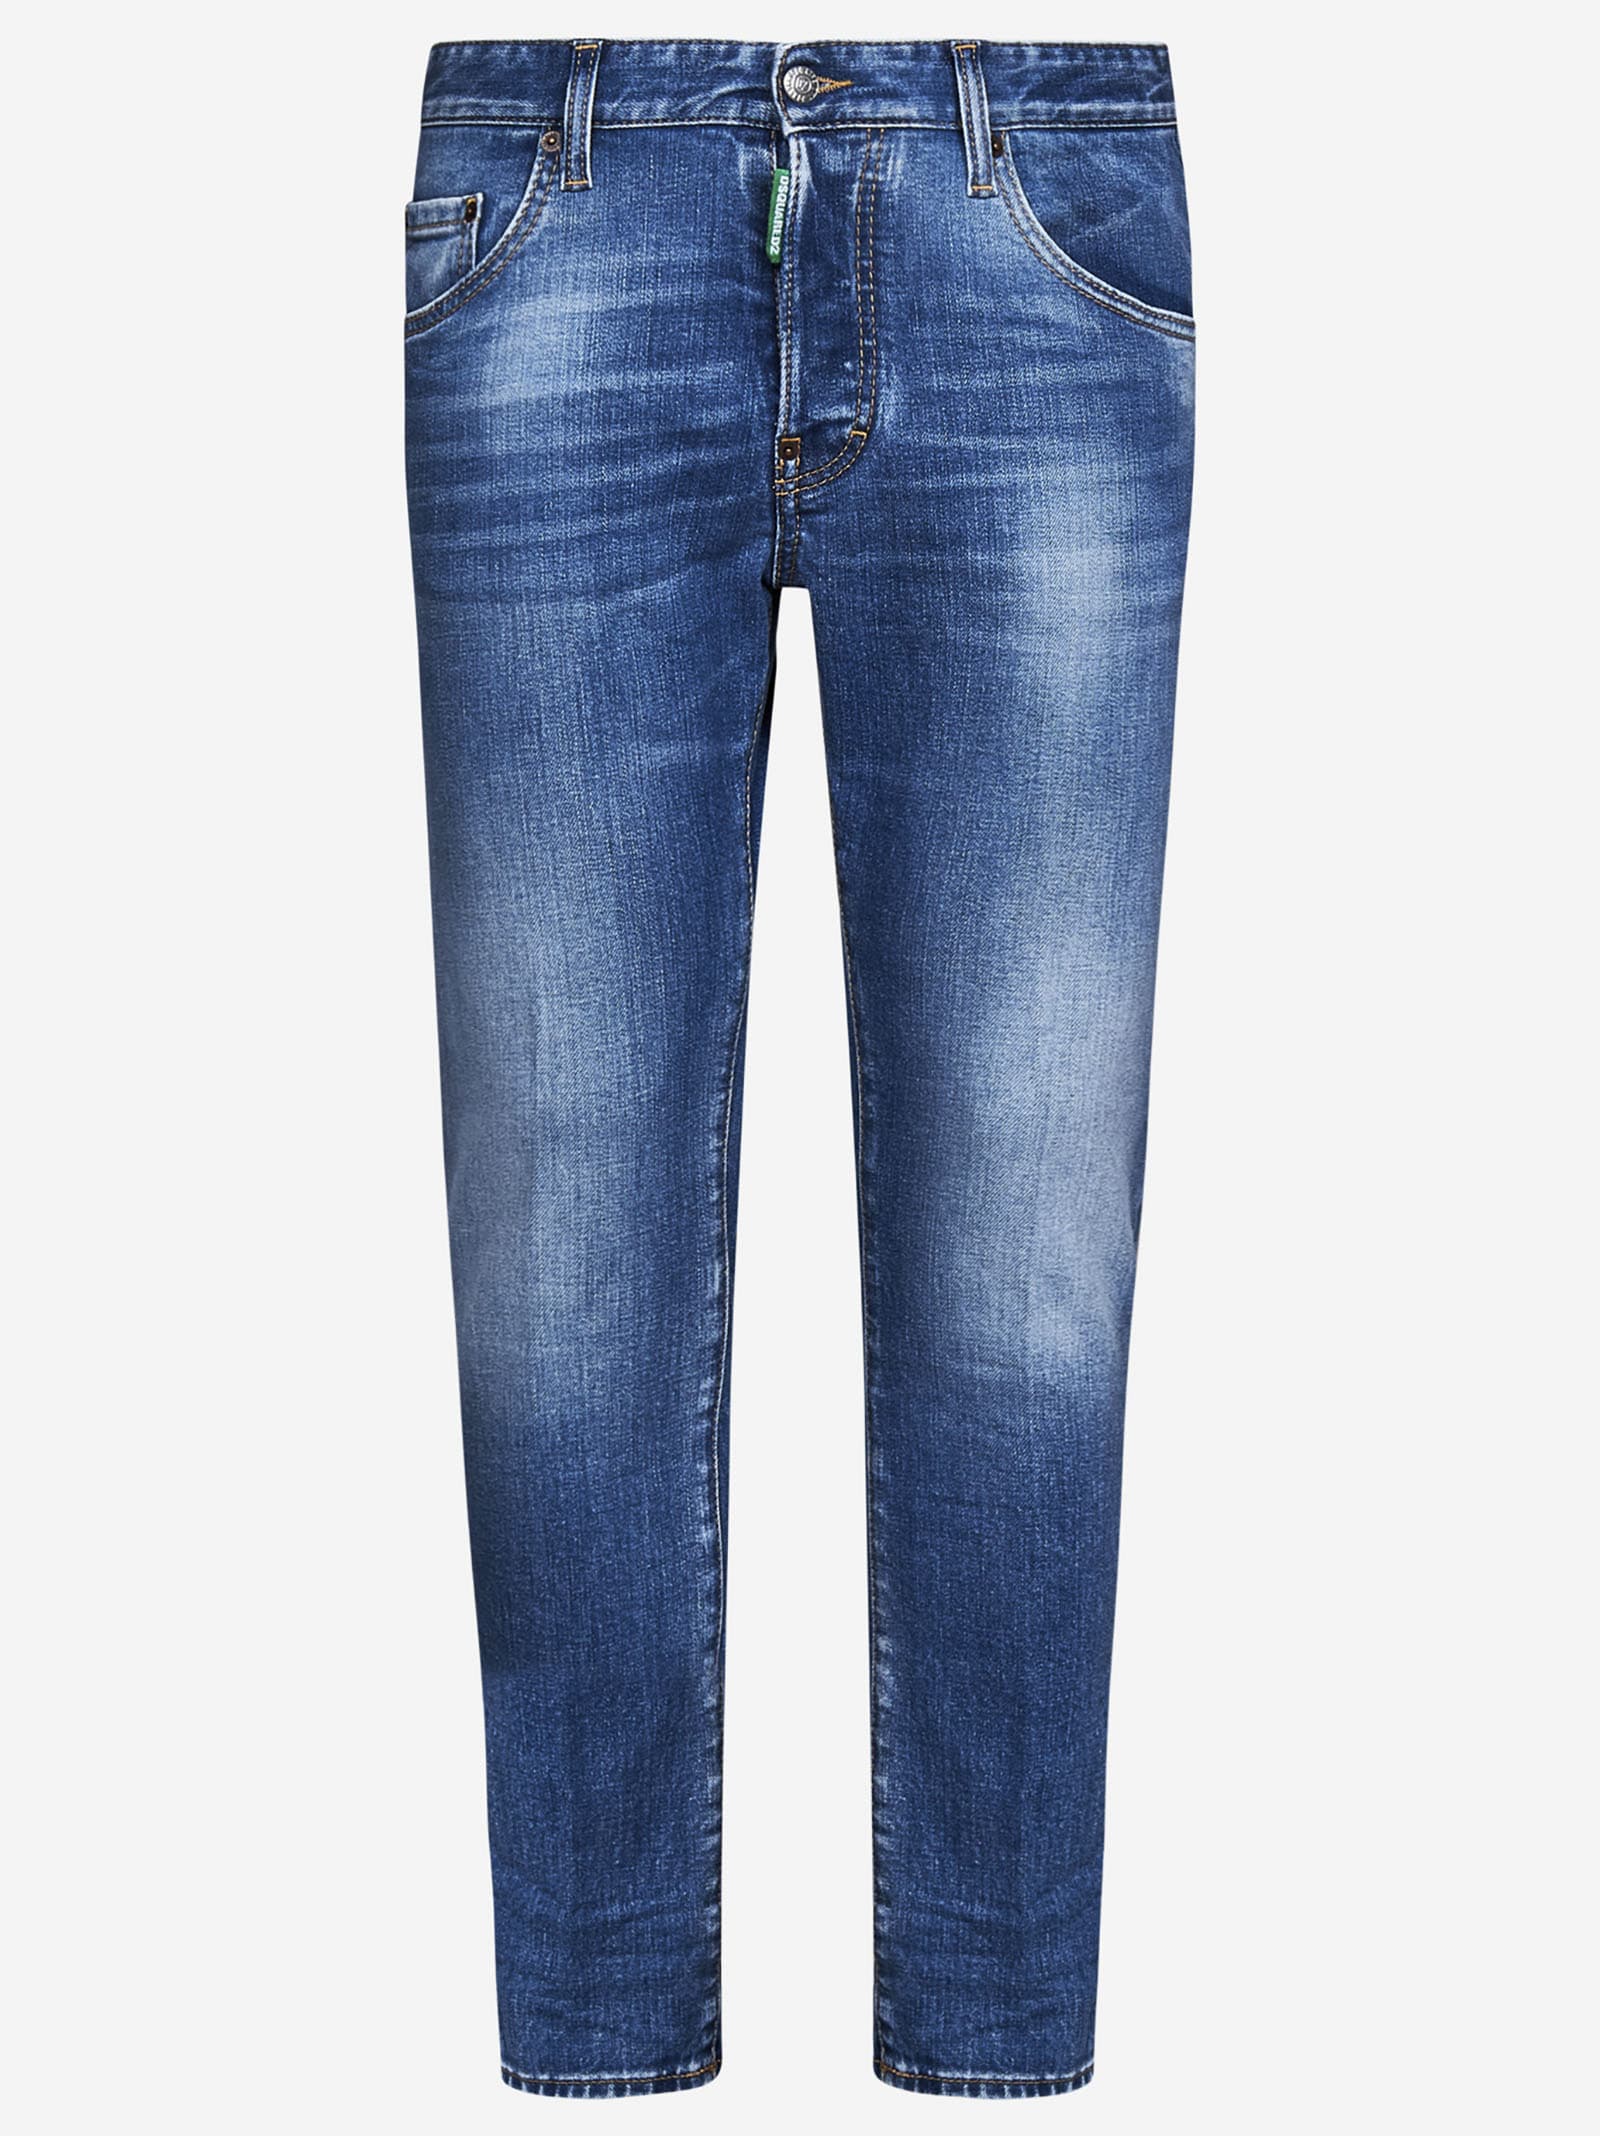 Dsquared2 One Life Skater Jeans